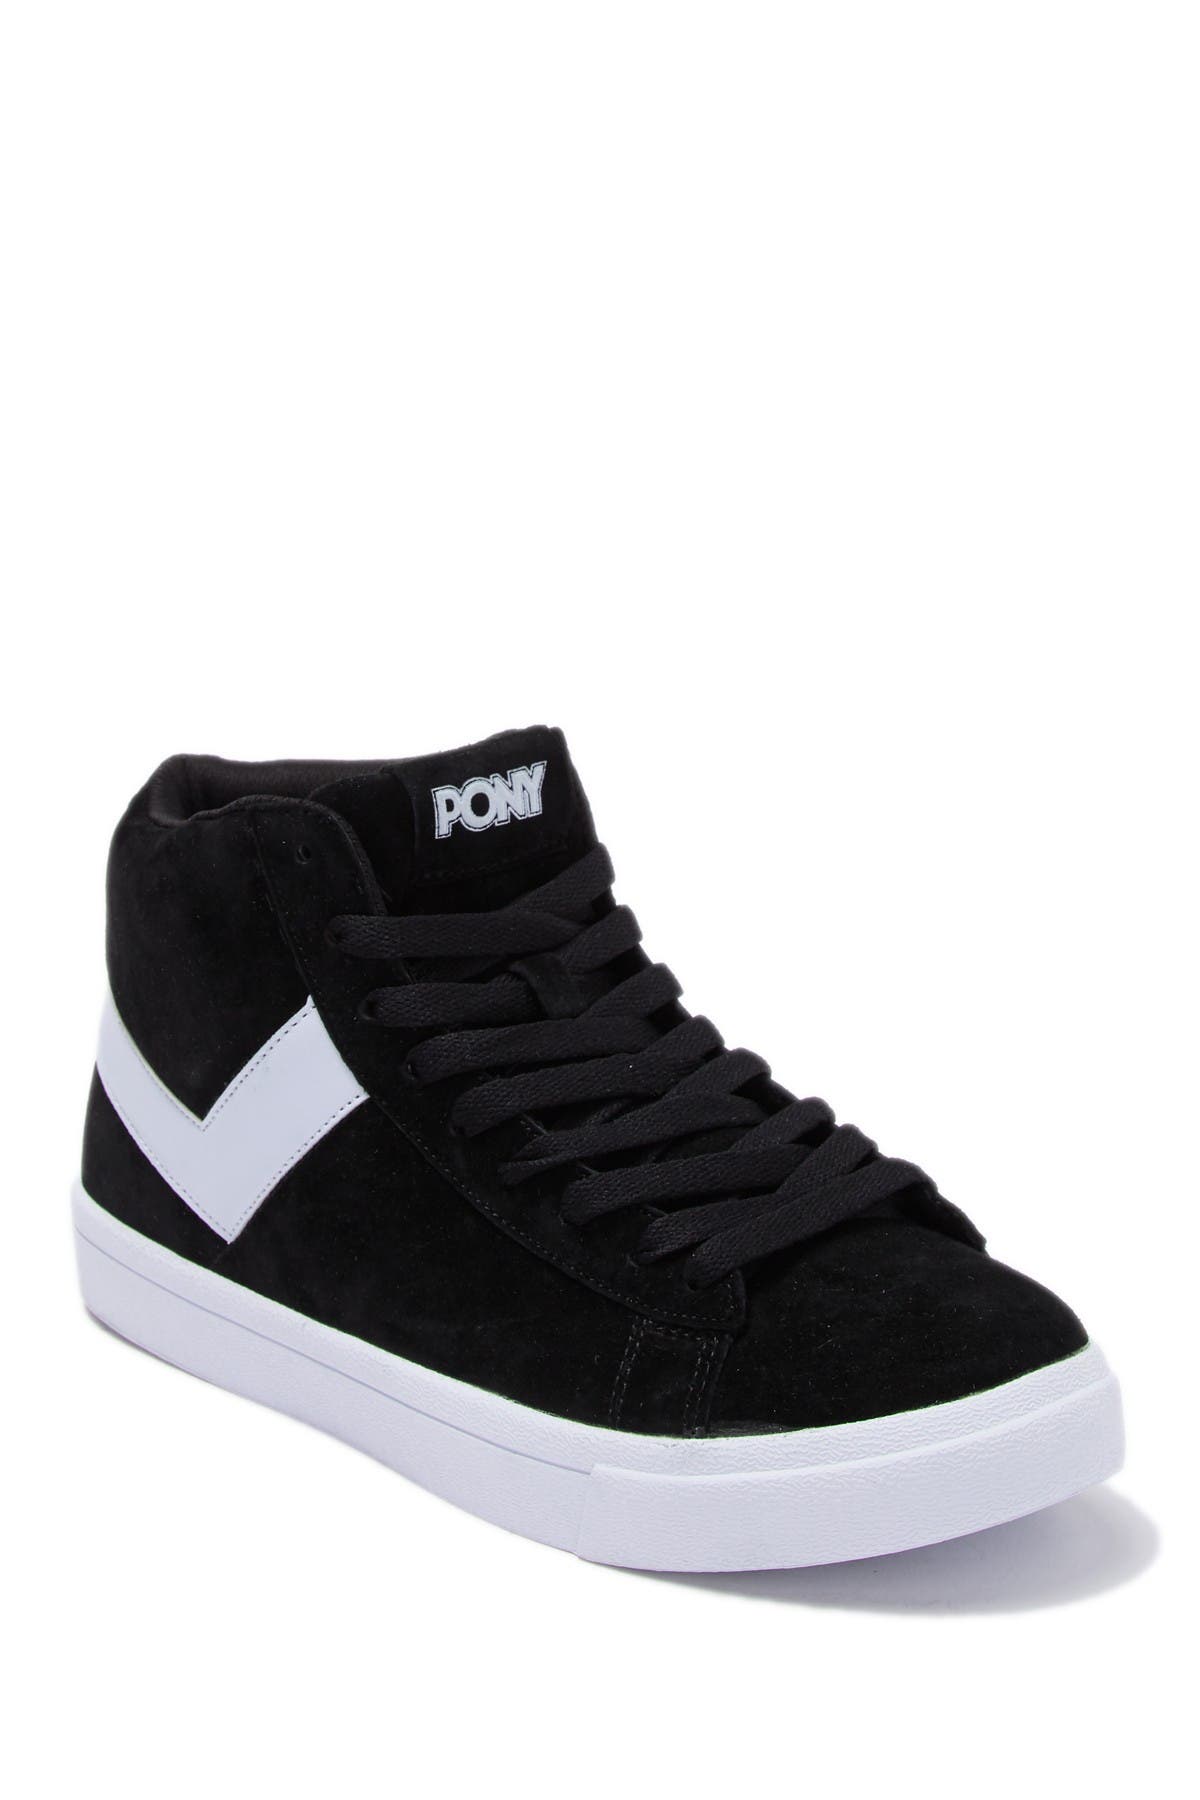 PONY | Classic High Top Sneaker 